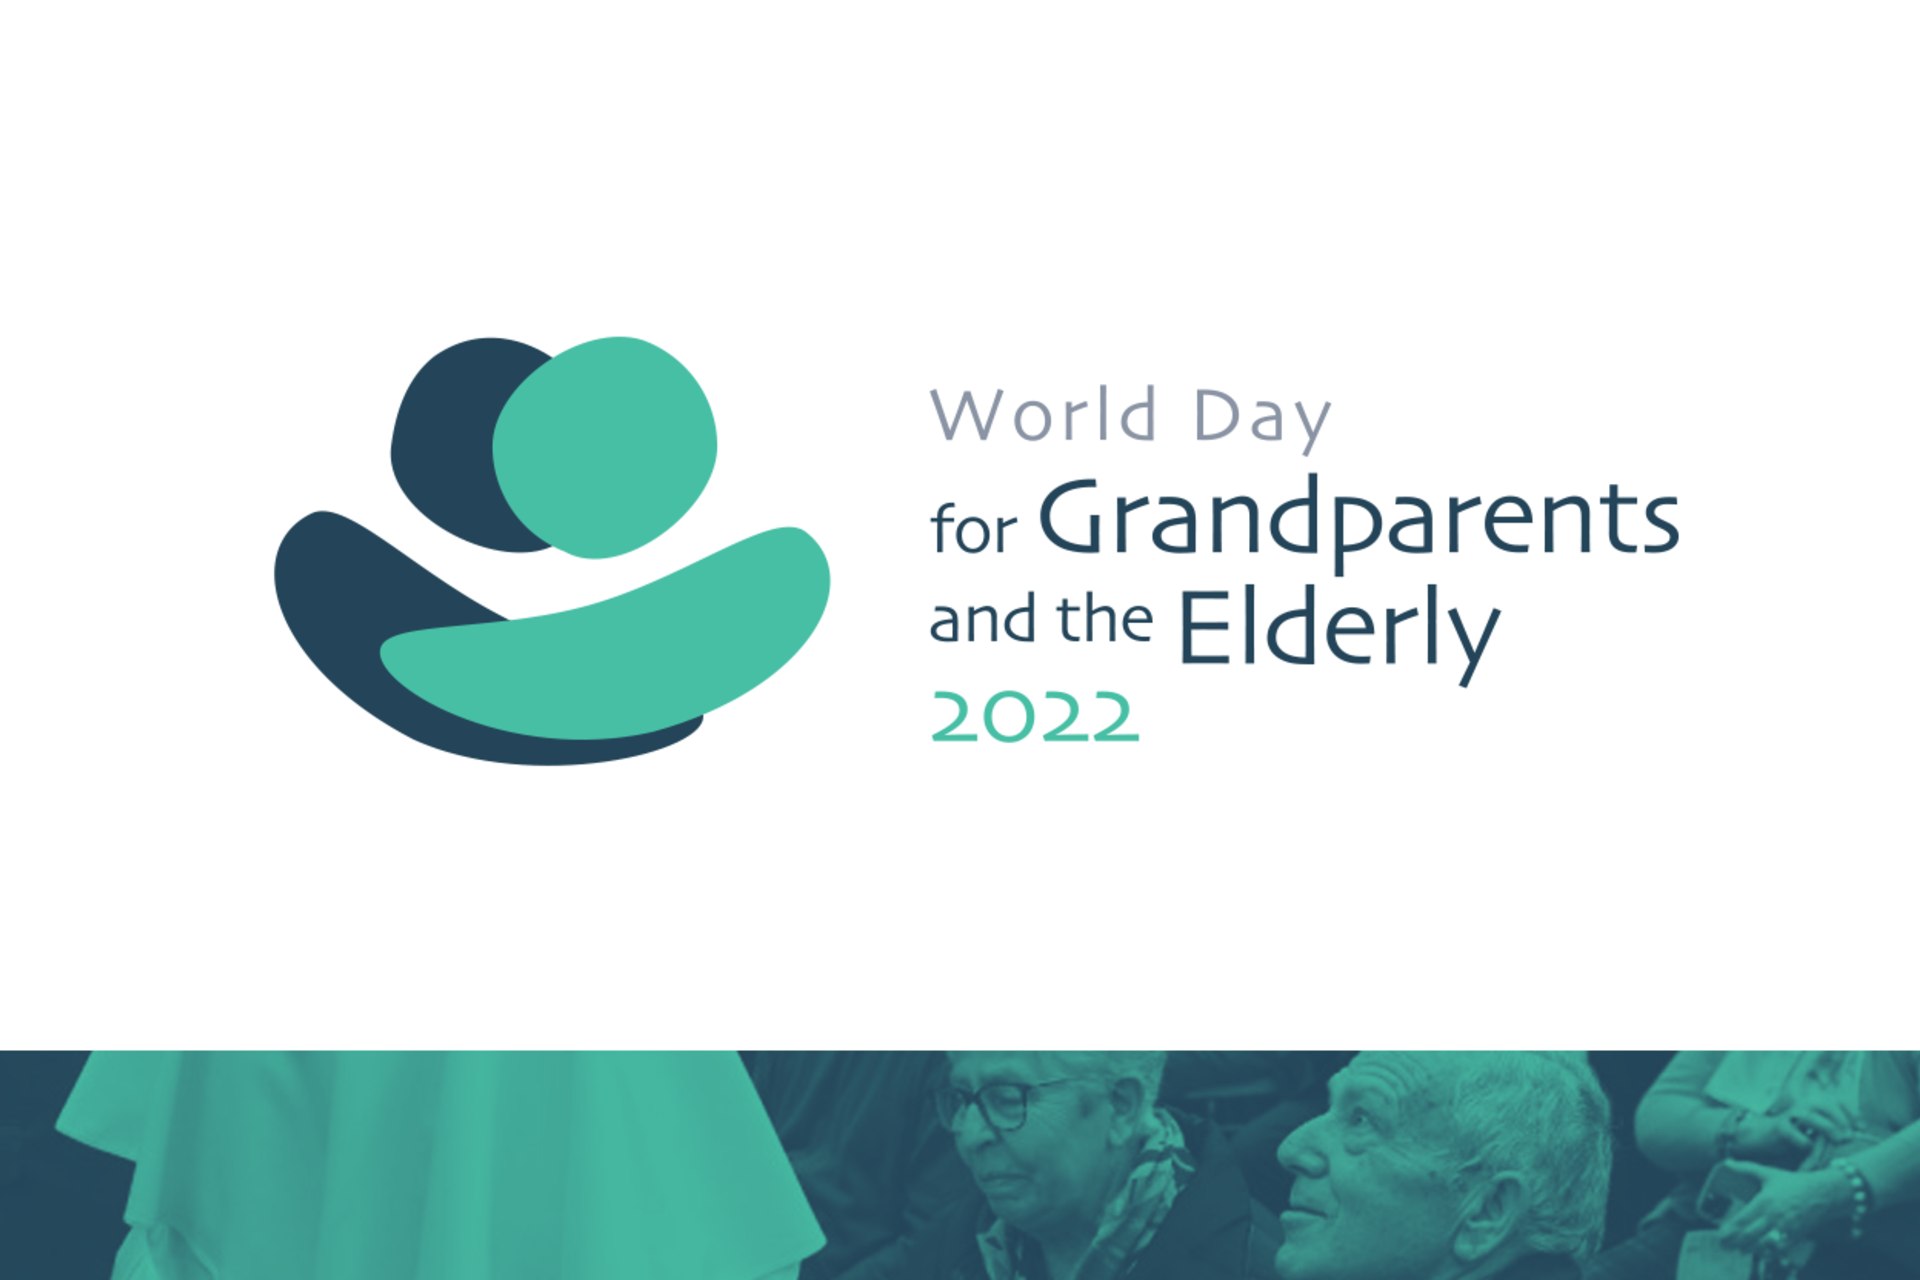 Pope Francis' Message for the World Day for Grandparents and the Elderly 2022